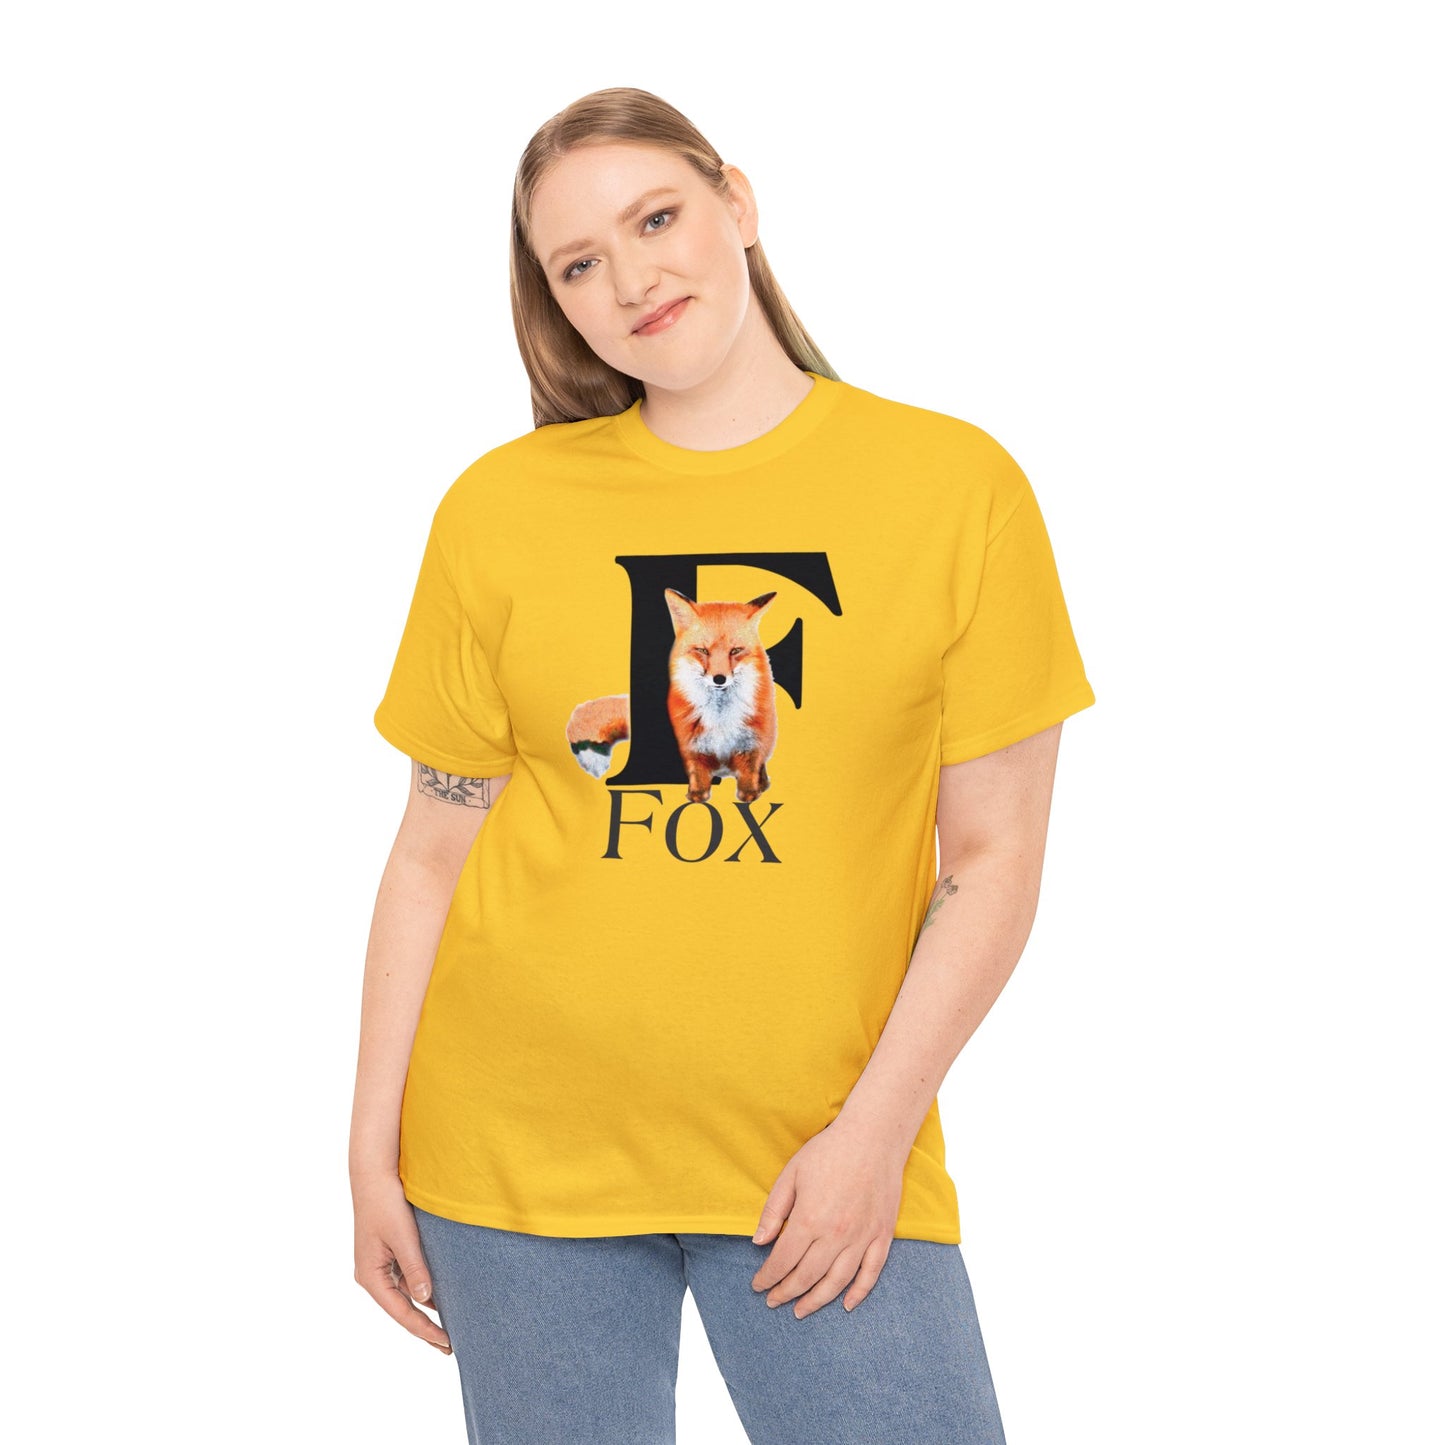 F is for Fox T-Shirt, Animal Letter F Tee, cute Fuzzy Fox Tee, Fox Drawing T-Shirt, animal t-shirt,